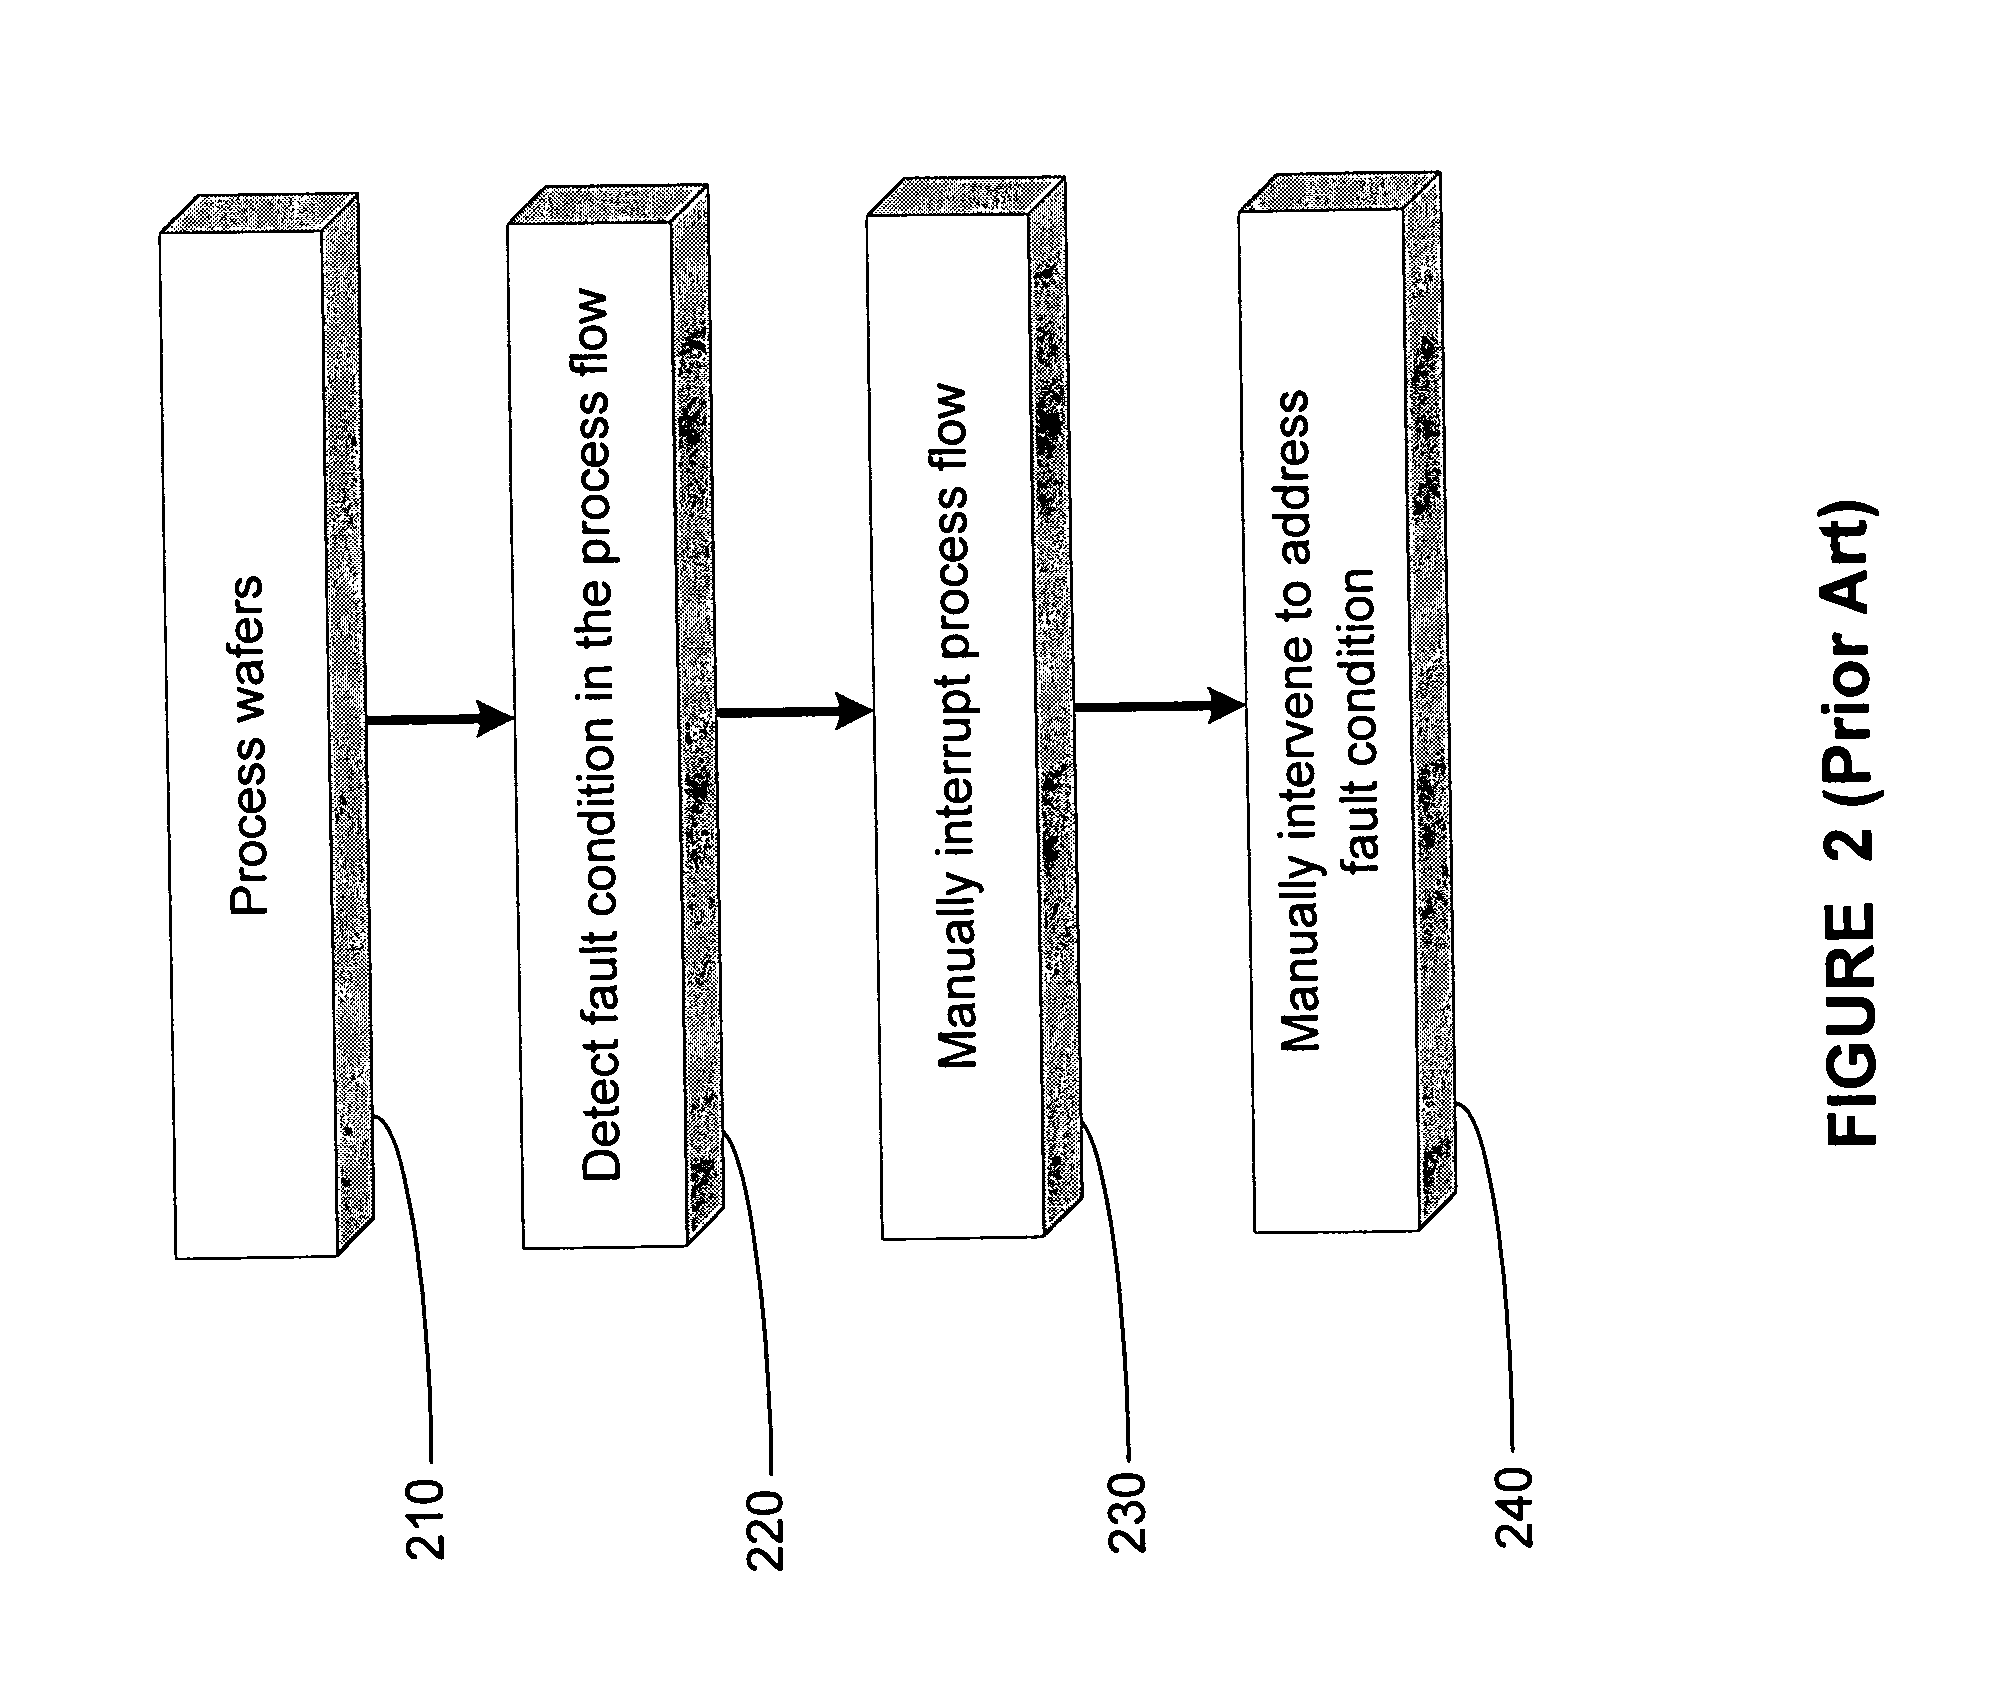 Method and apparatus for impasse detection and resolution